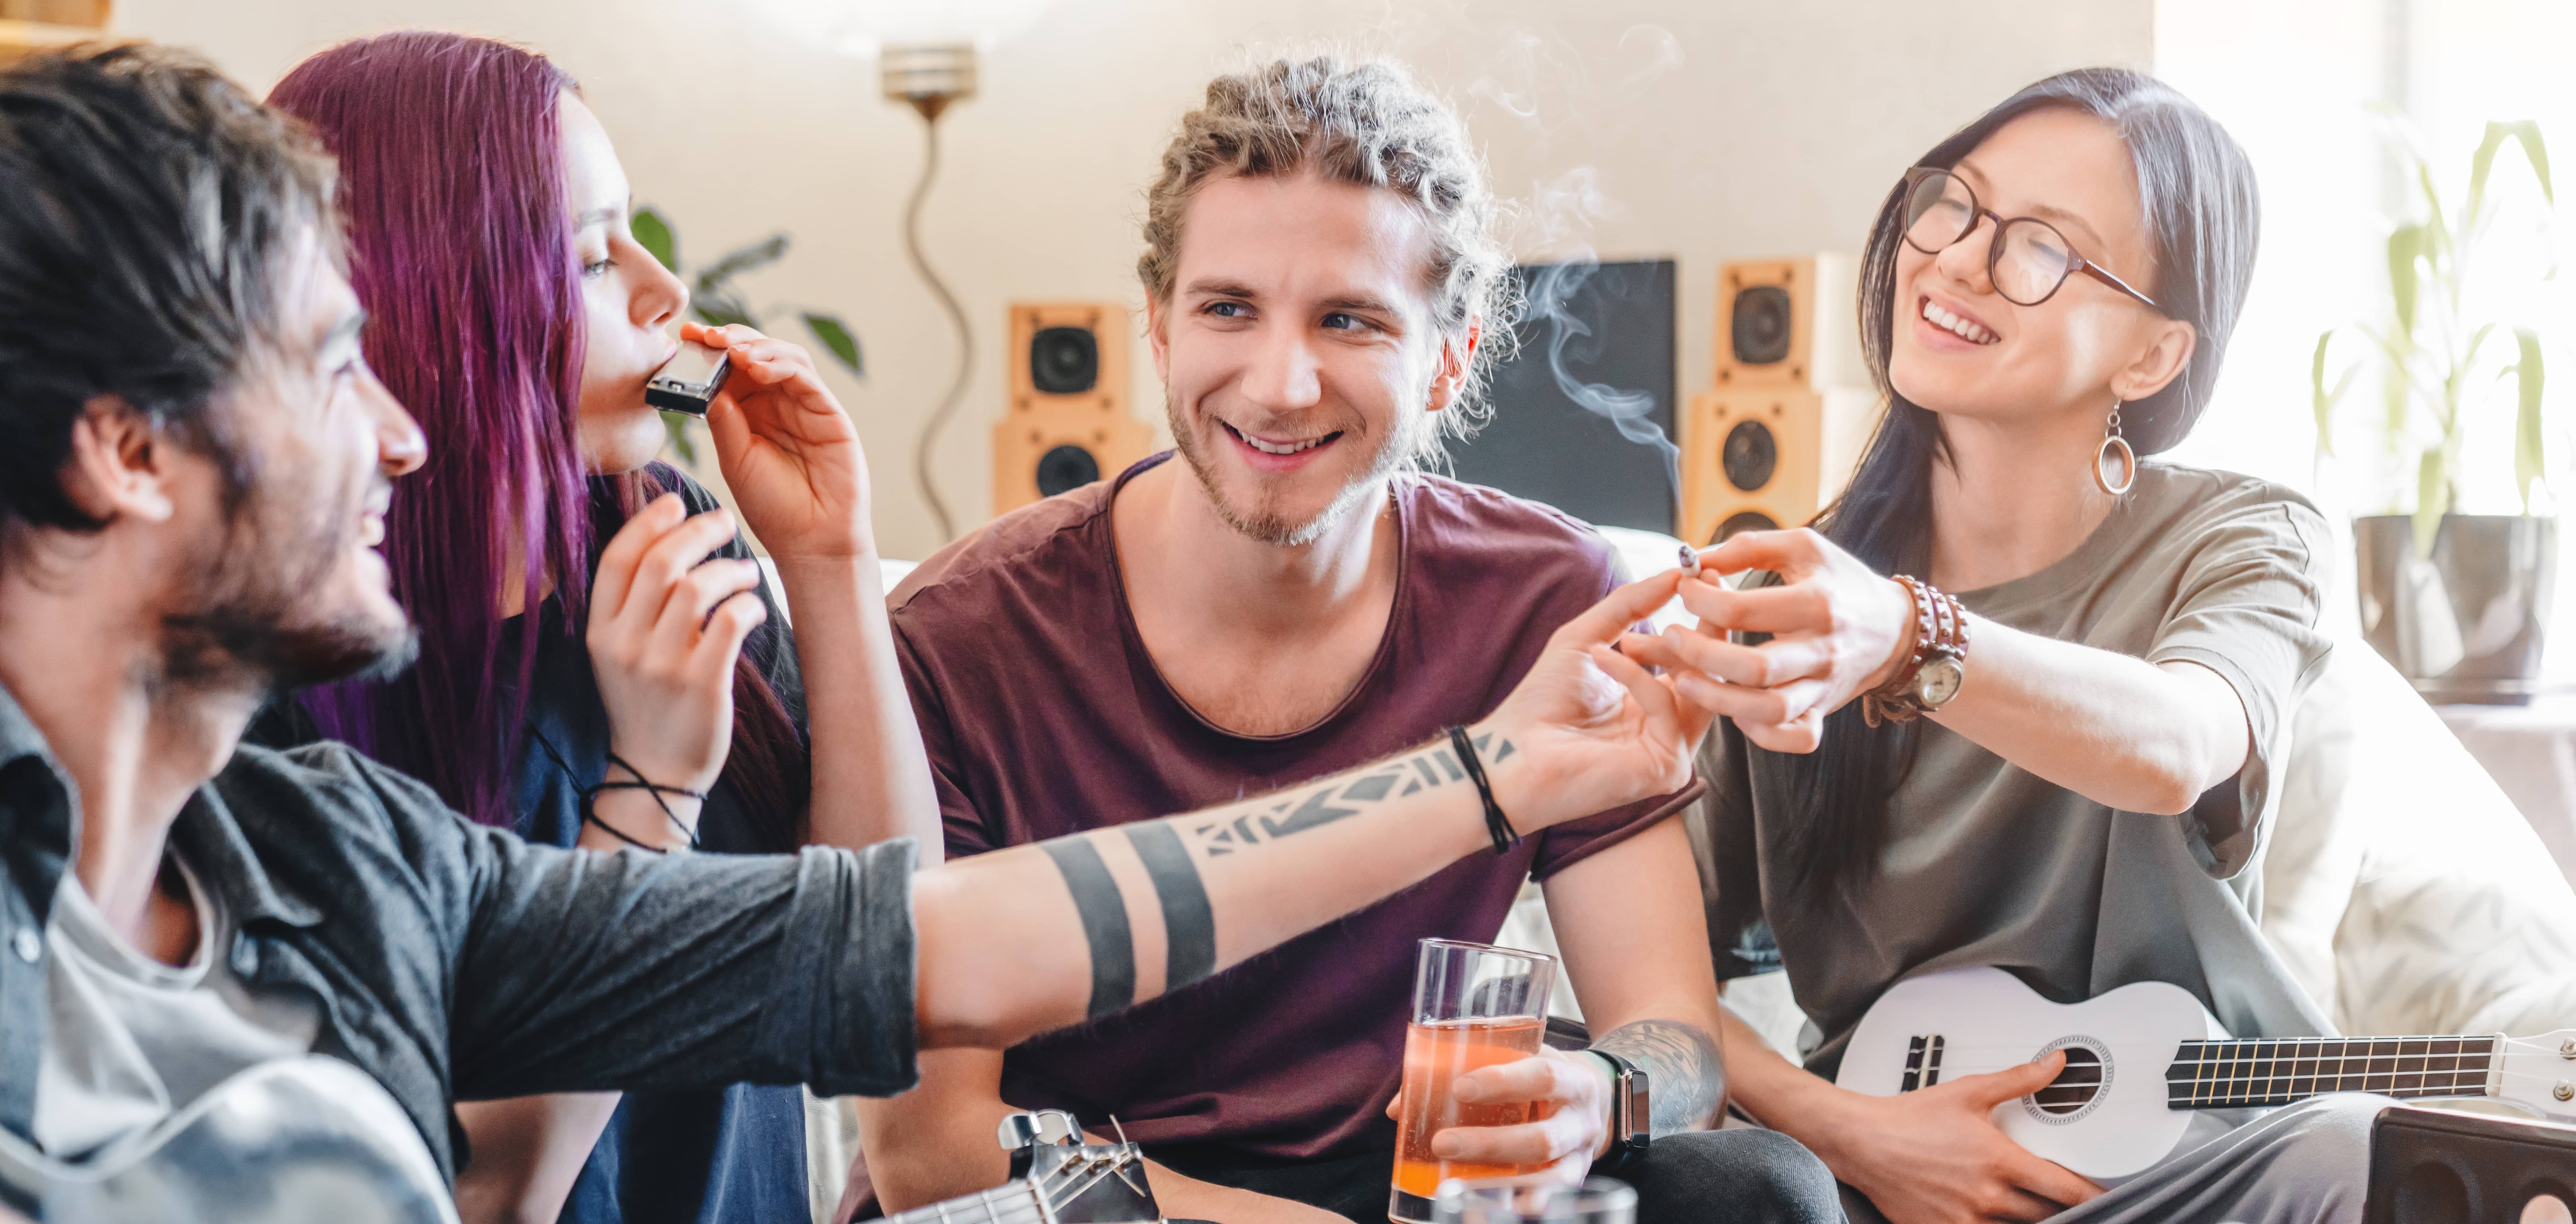 young-woman-preparing-to-smoke-joint-with-cannabis-while-relaxing-with-friends-at-home